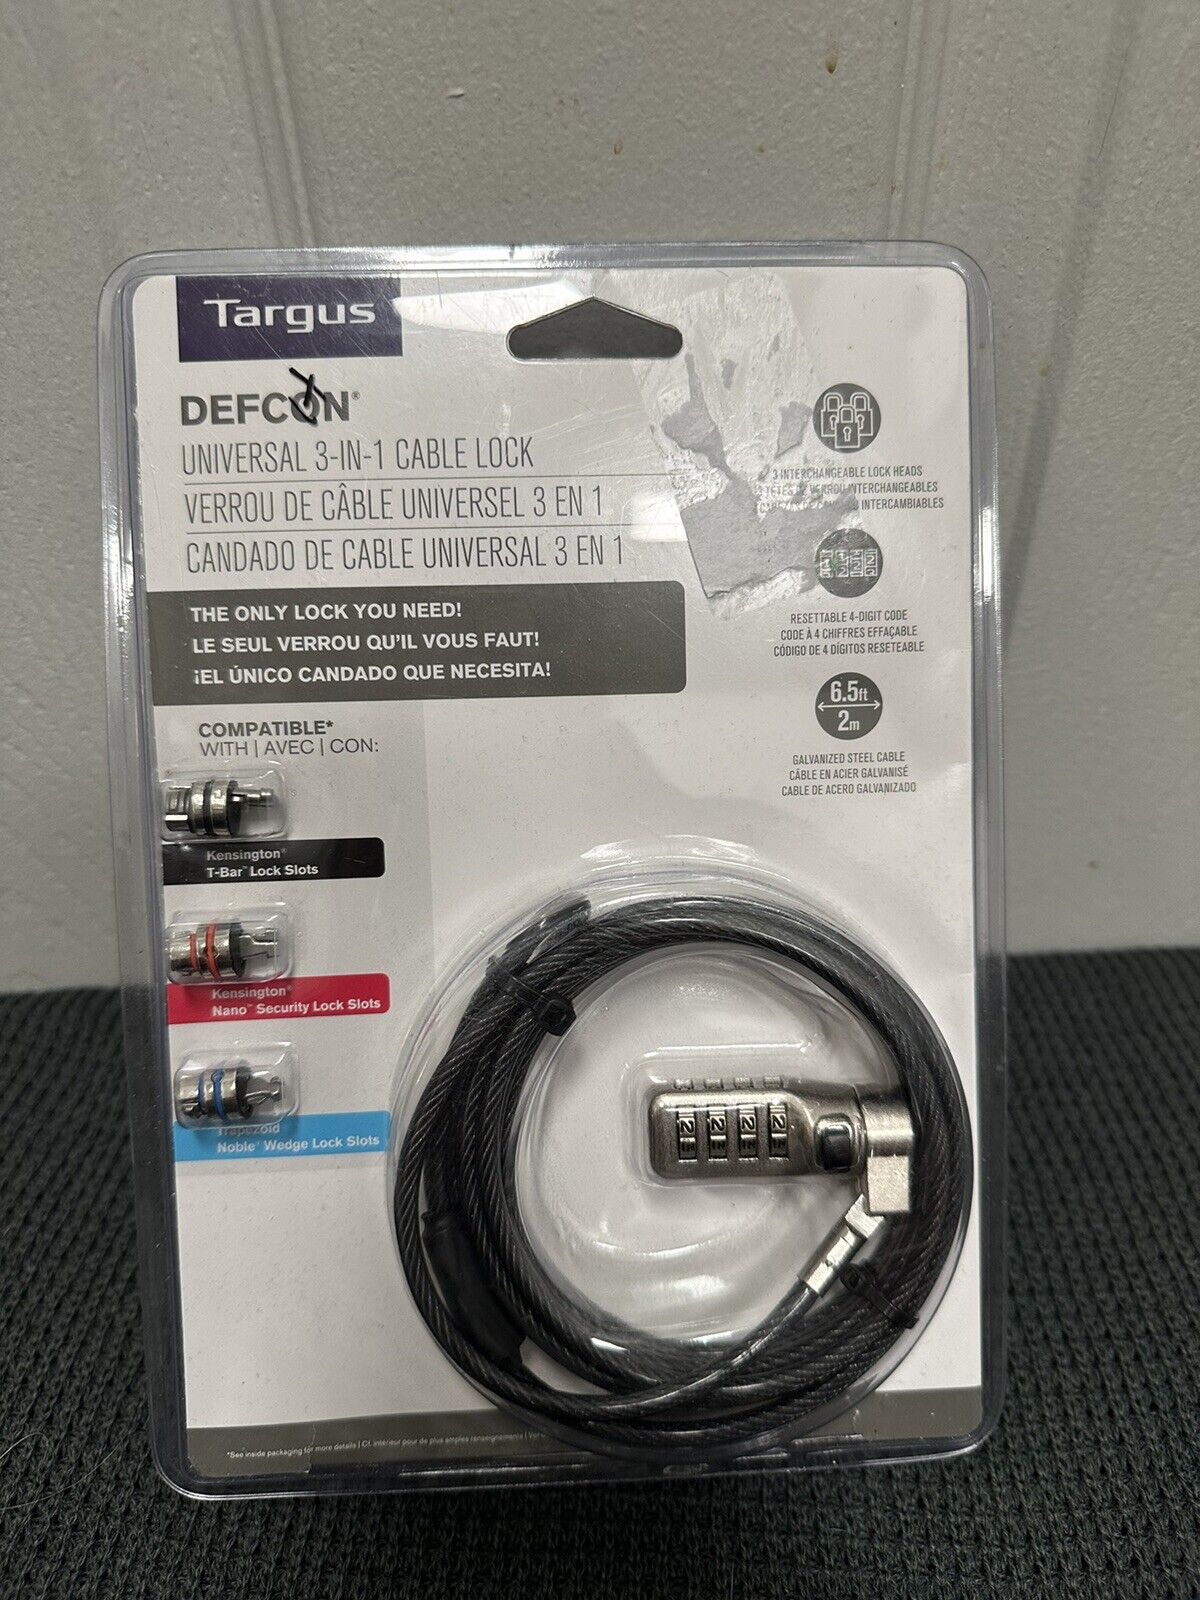 Targus DEFCON Universal 3-in-1 Cable LocK